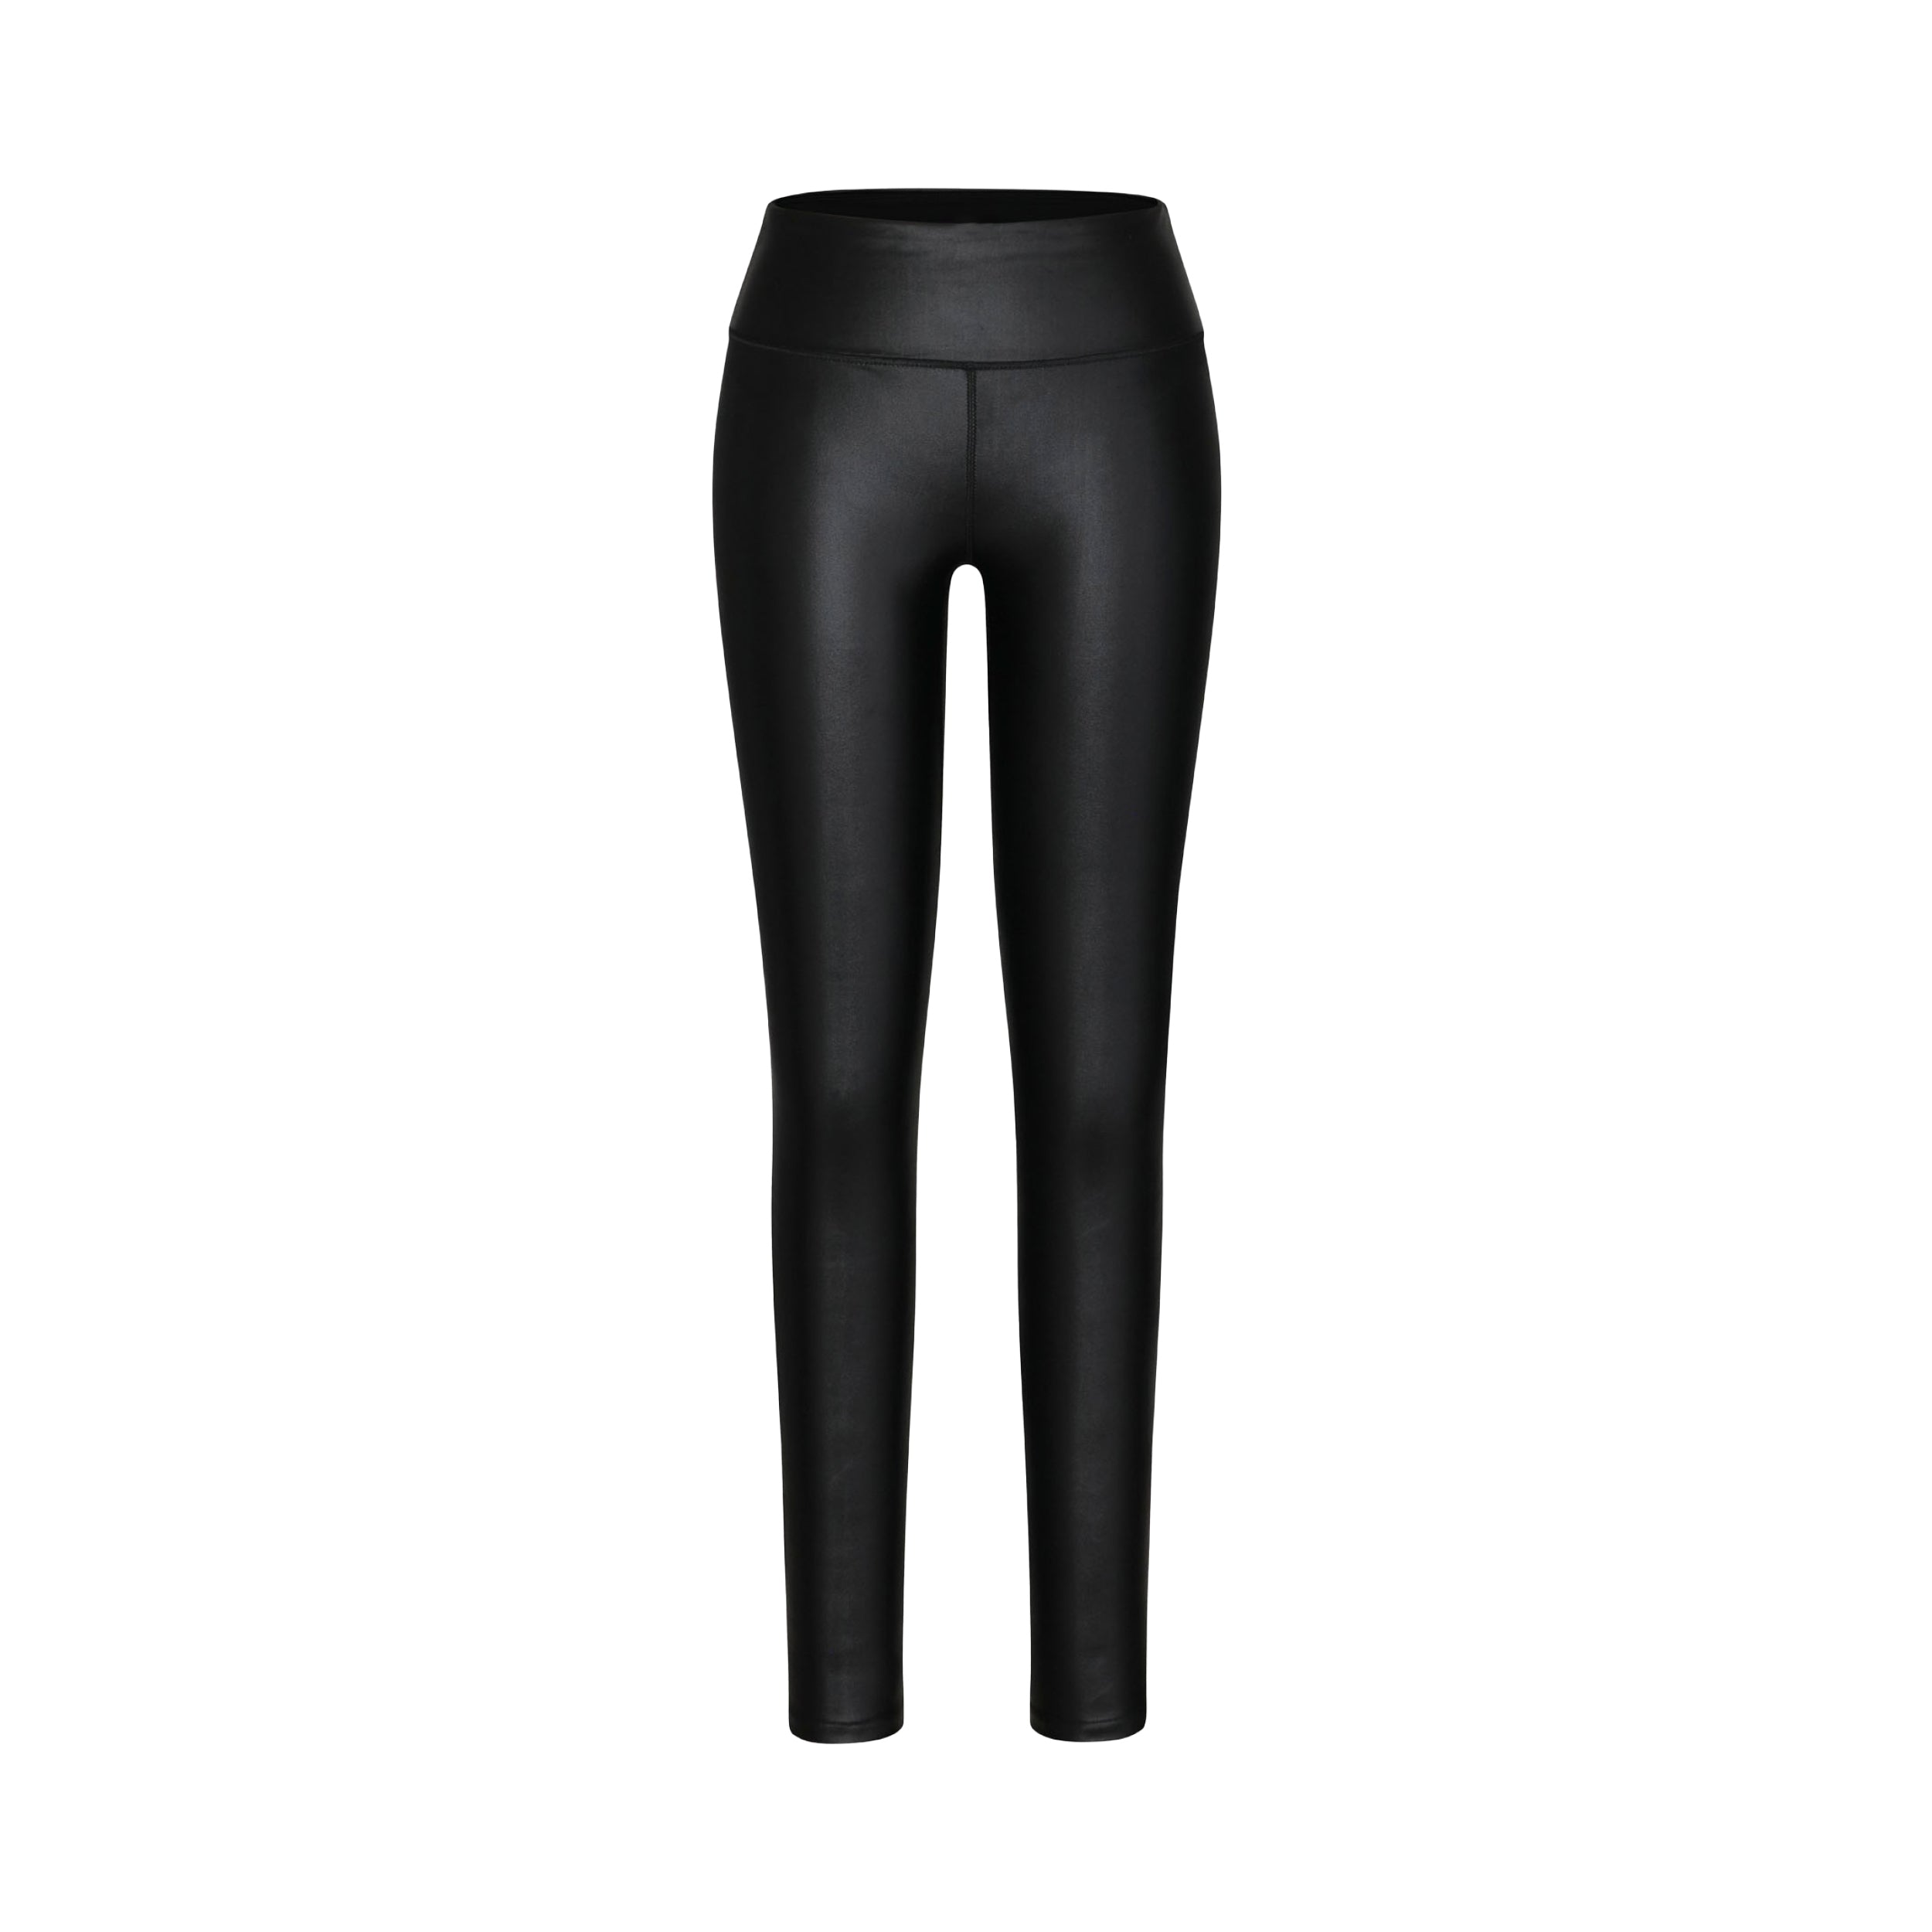 Product view of lightweight, lustrous shine, quick drying black gloss liquid leggings